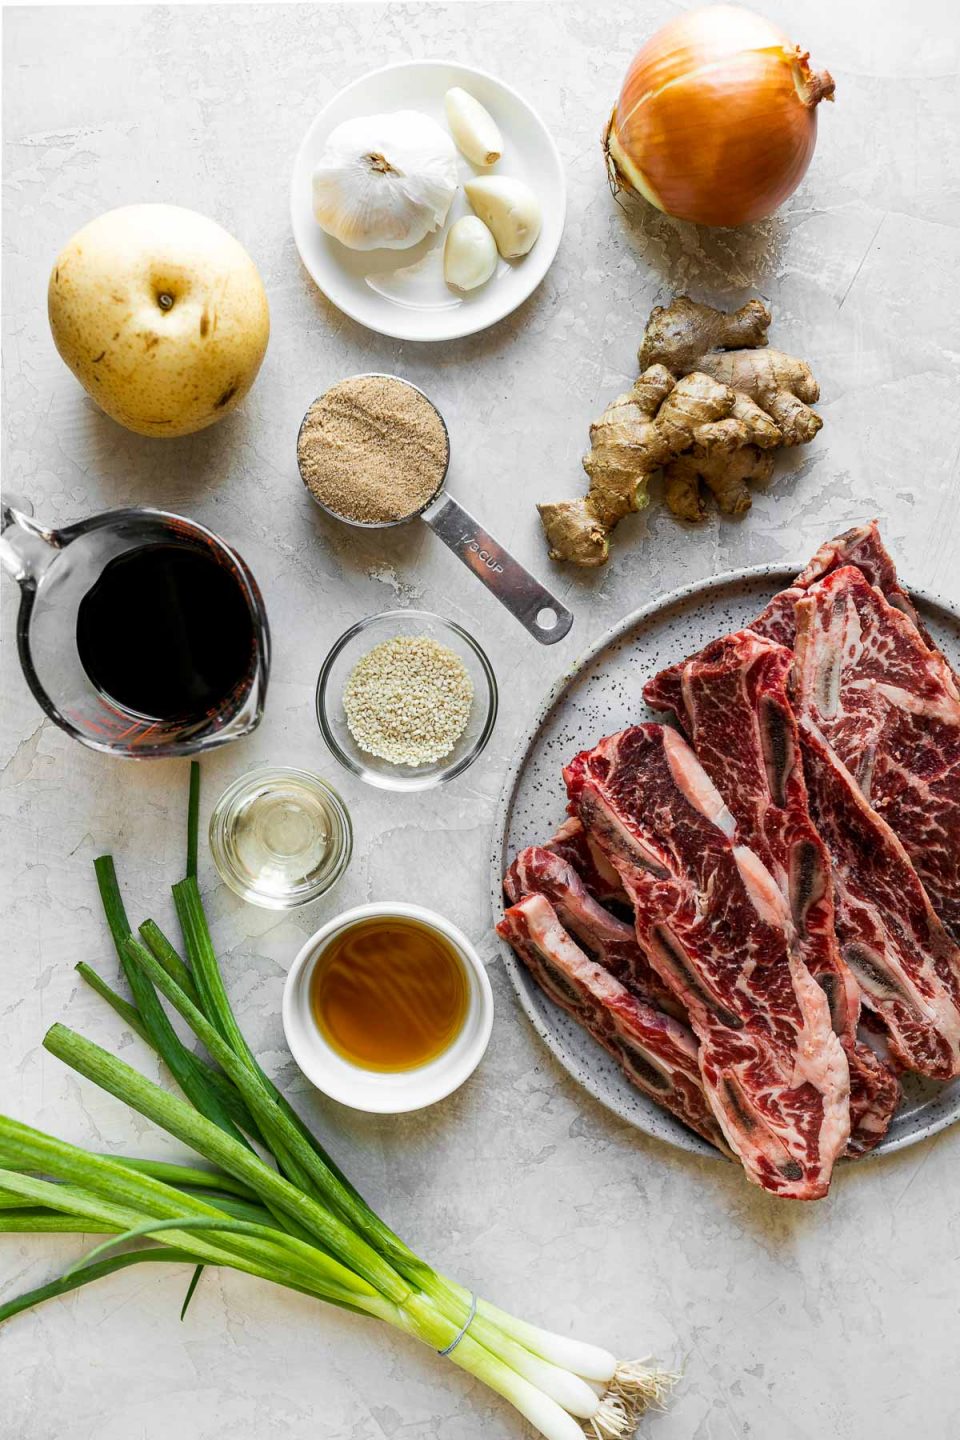 Grilled Kalbi ingredients arranged on a cement surface – green onions, sesame oil, rice vinegar, sesame seeds, garlic, brown sugar, onion, soy sauce, ginger, pear, & flanken-style beef short ribs.